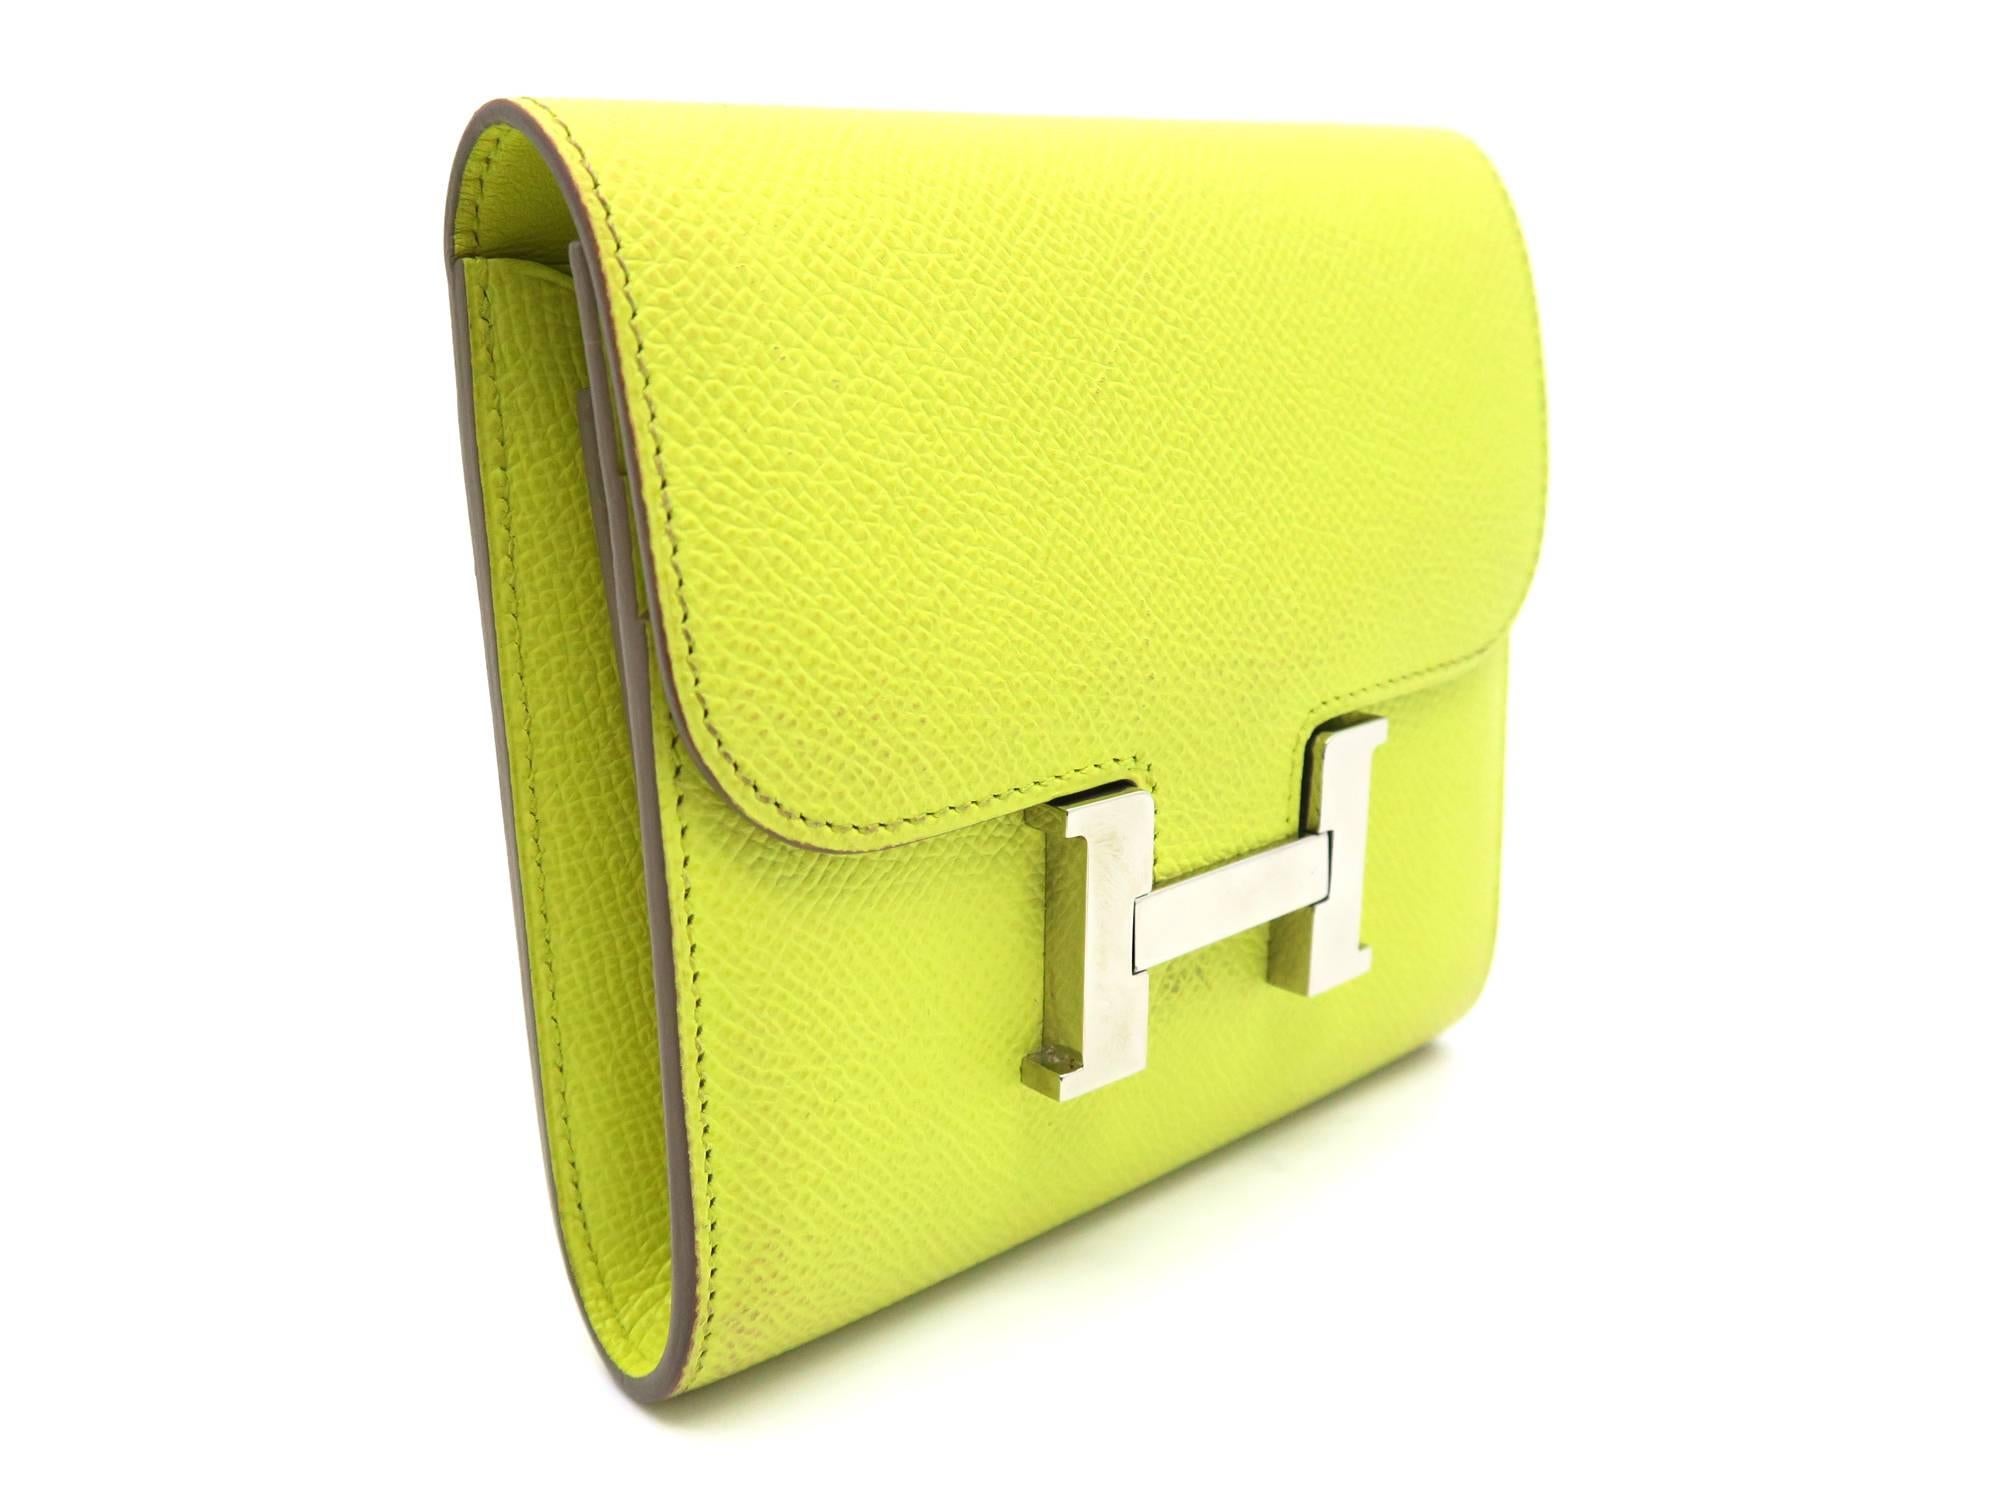 Color: Yellow / Lime (designer color)

Material: Epsom Leather 

Condition: Rank C
Overall: Fair. Few defects
Surface: Obvious Stains
Corners: Minor Stains
Edges: Good
Handles/Straps: -
Hardware: Minor Scratches

Dimension: W13 × H11.5 ×